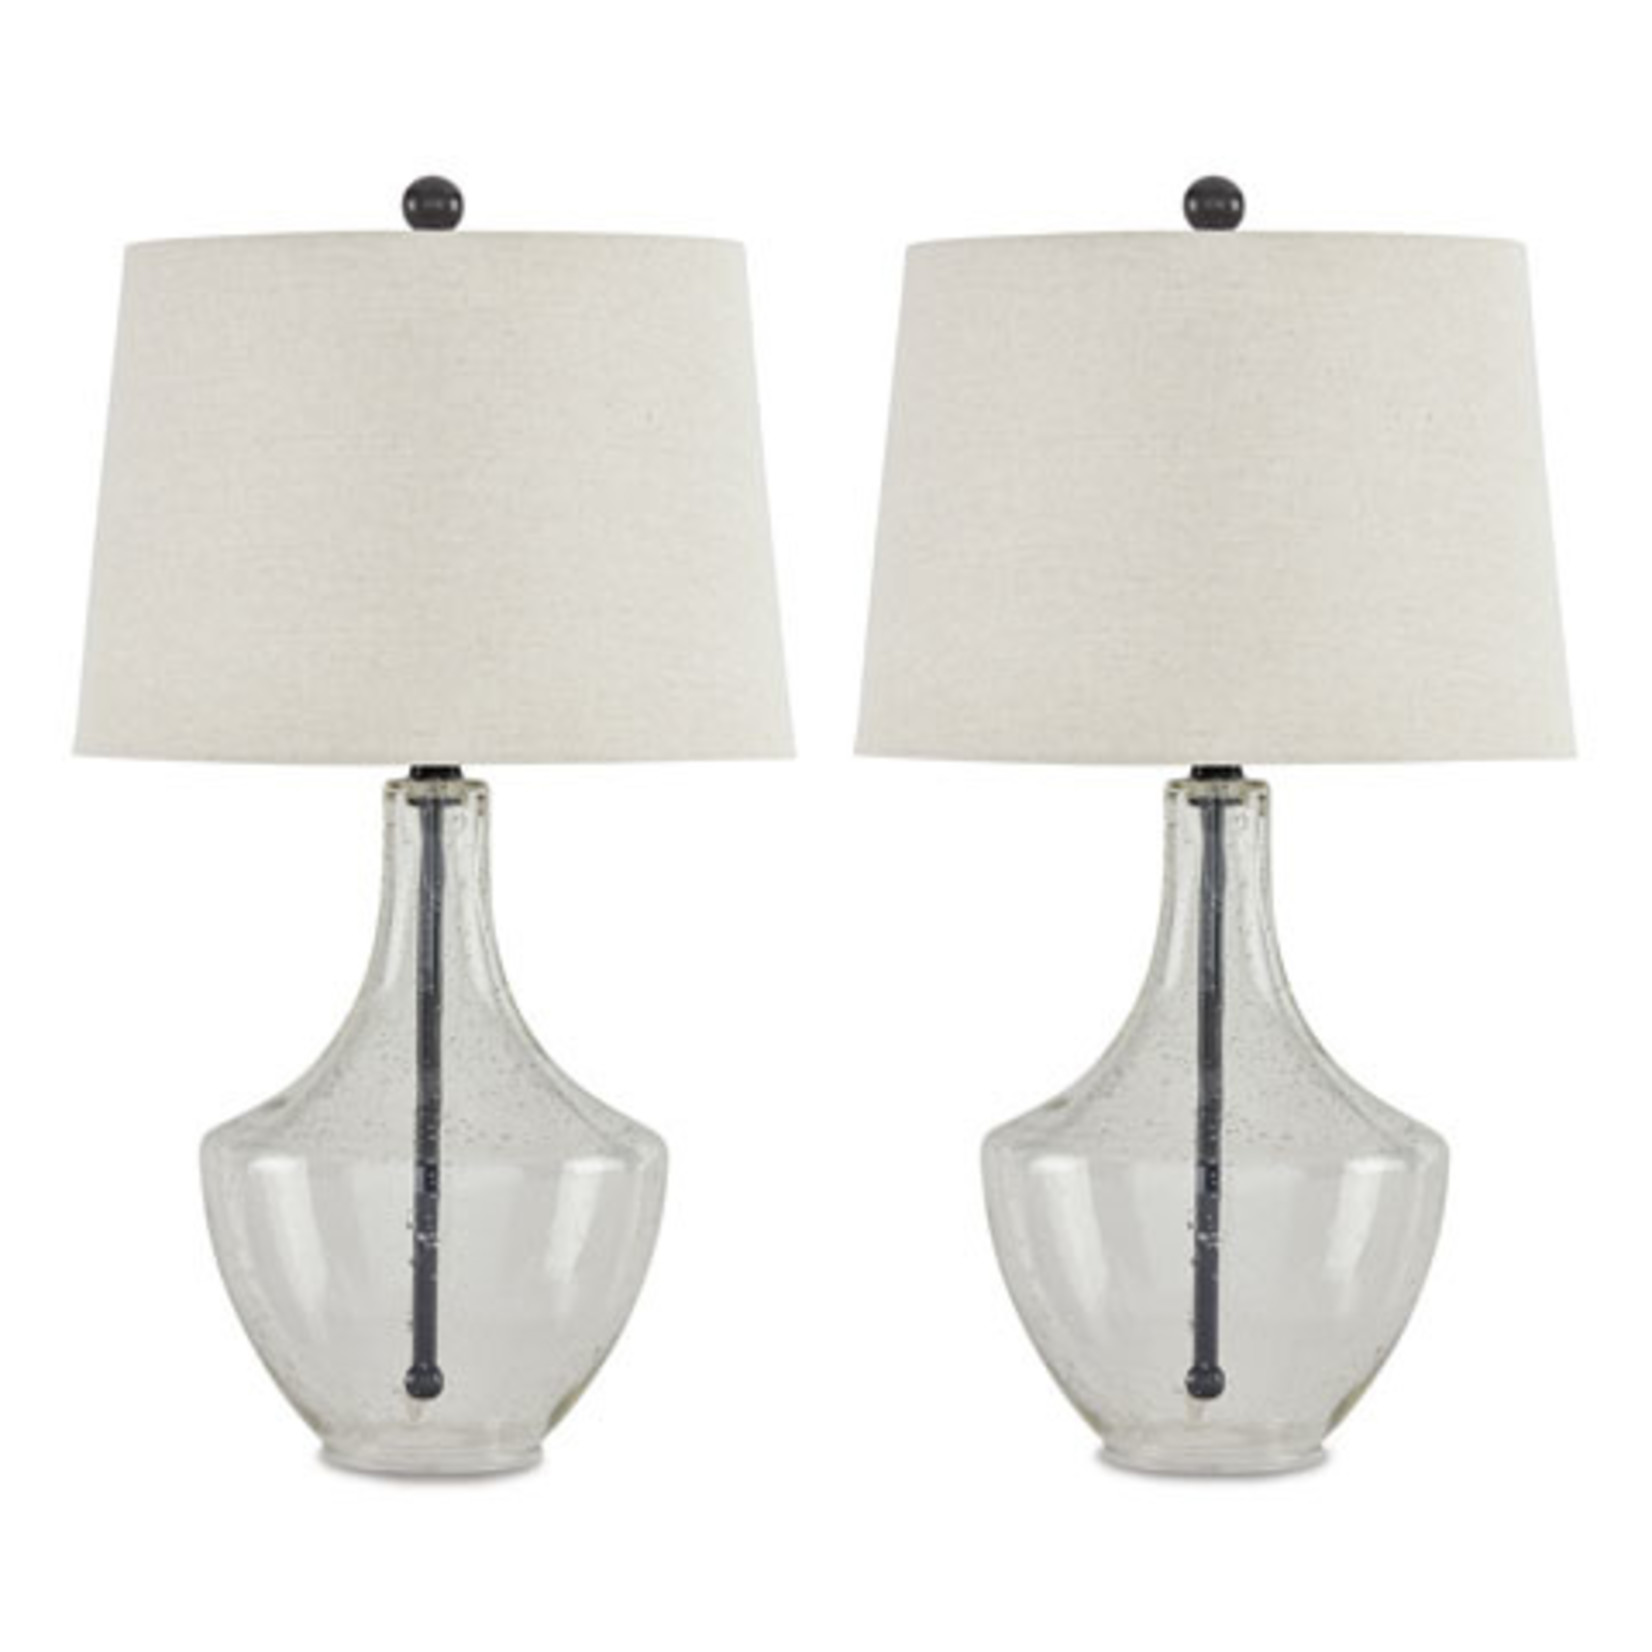 ASHLEY FURNITURE ASHLEY GREGSBY GLASS TABLE LAMP (SET OF 2) - L431574